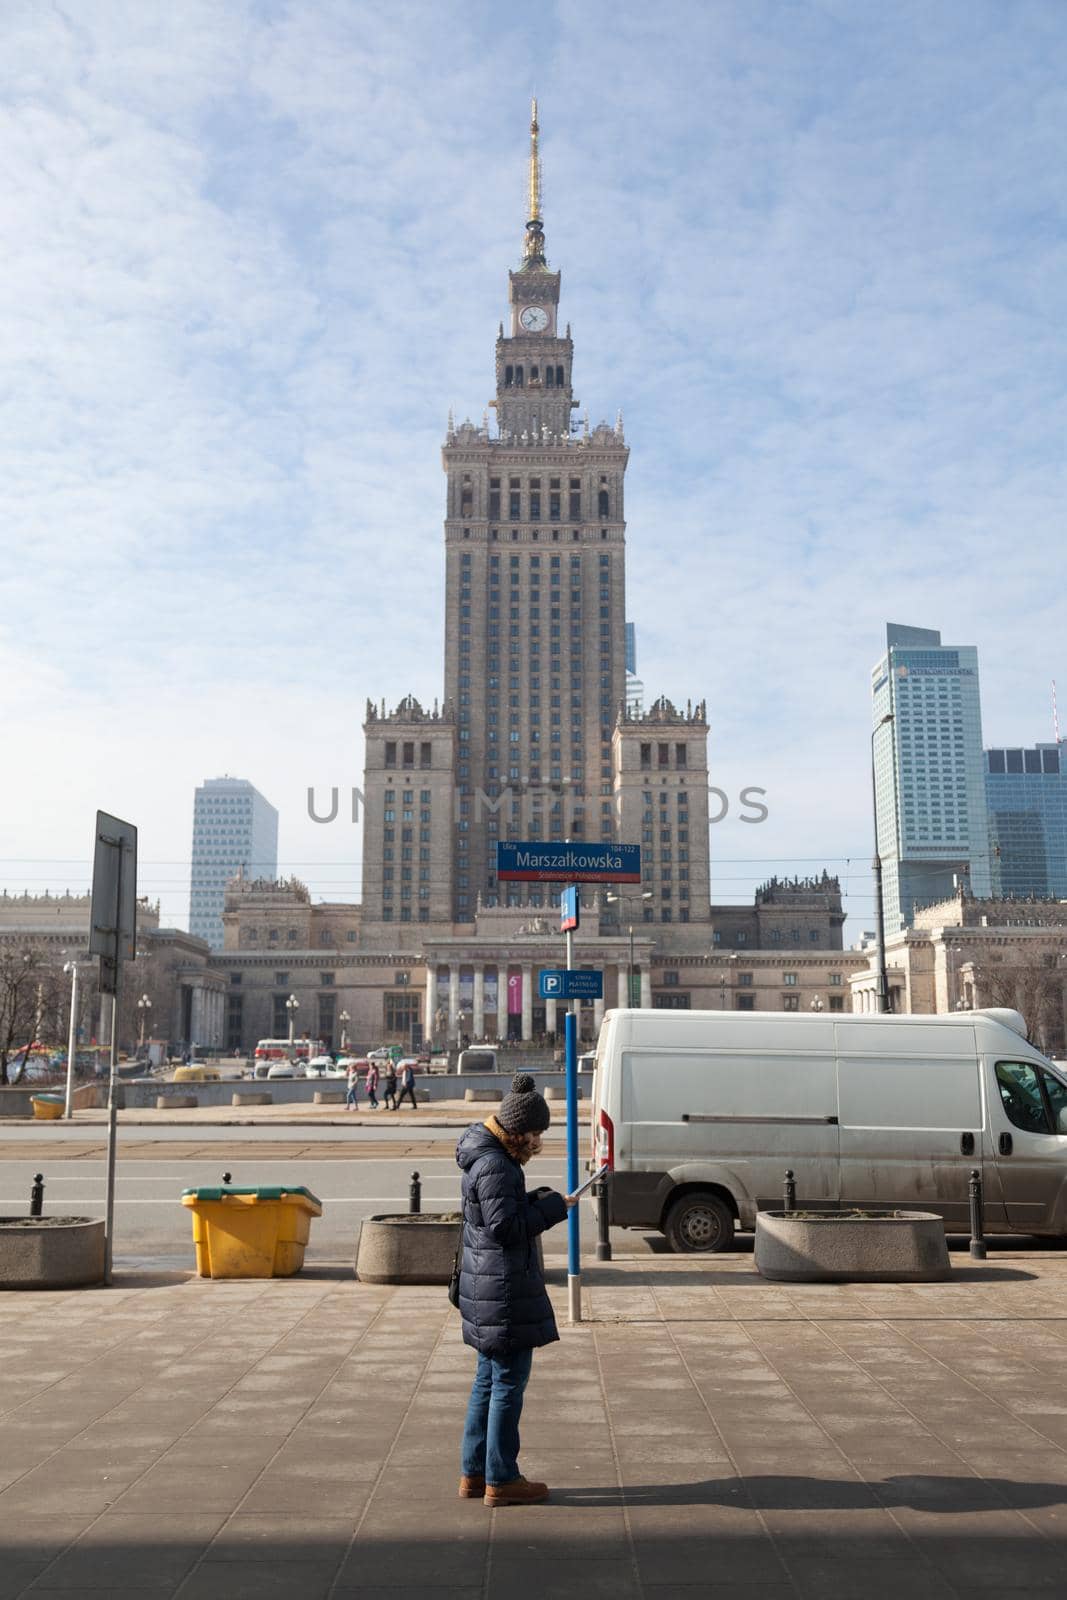 WARSAW, POLAND - March 2018 View of palace with tourist reading a map - Warsaw City Center by Sandronize